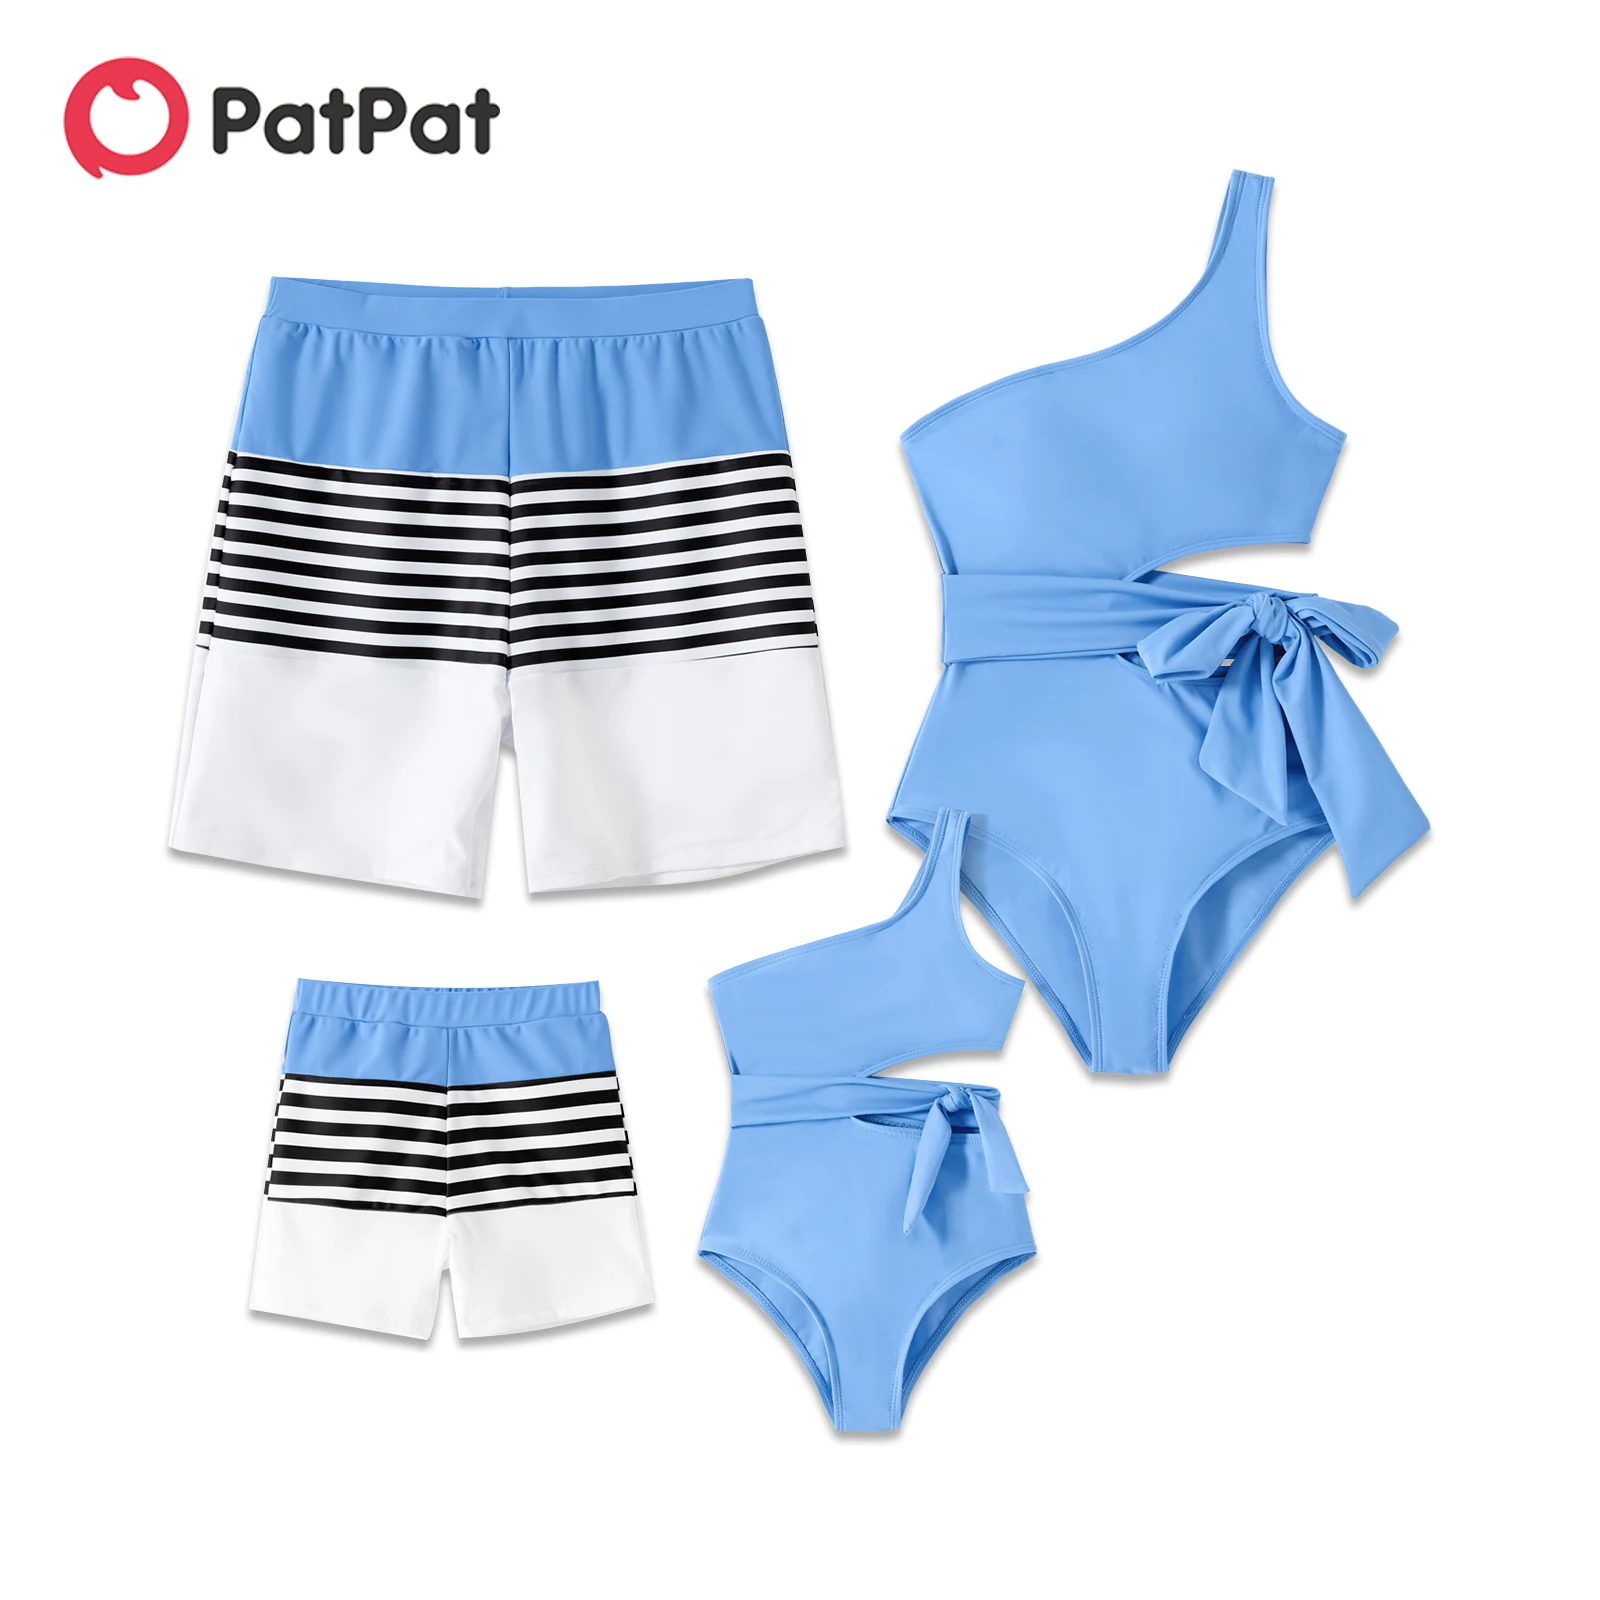 PatPat Family Matching Solid One Shoulder Cut Out PatPat Family MaSelf-tie One-piece Swimsuit and Striped Colorblock Swim Trunks